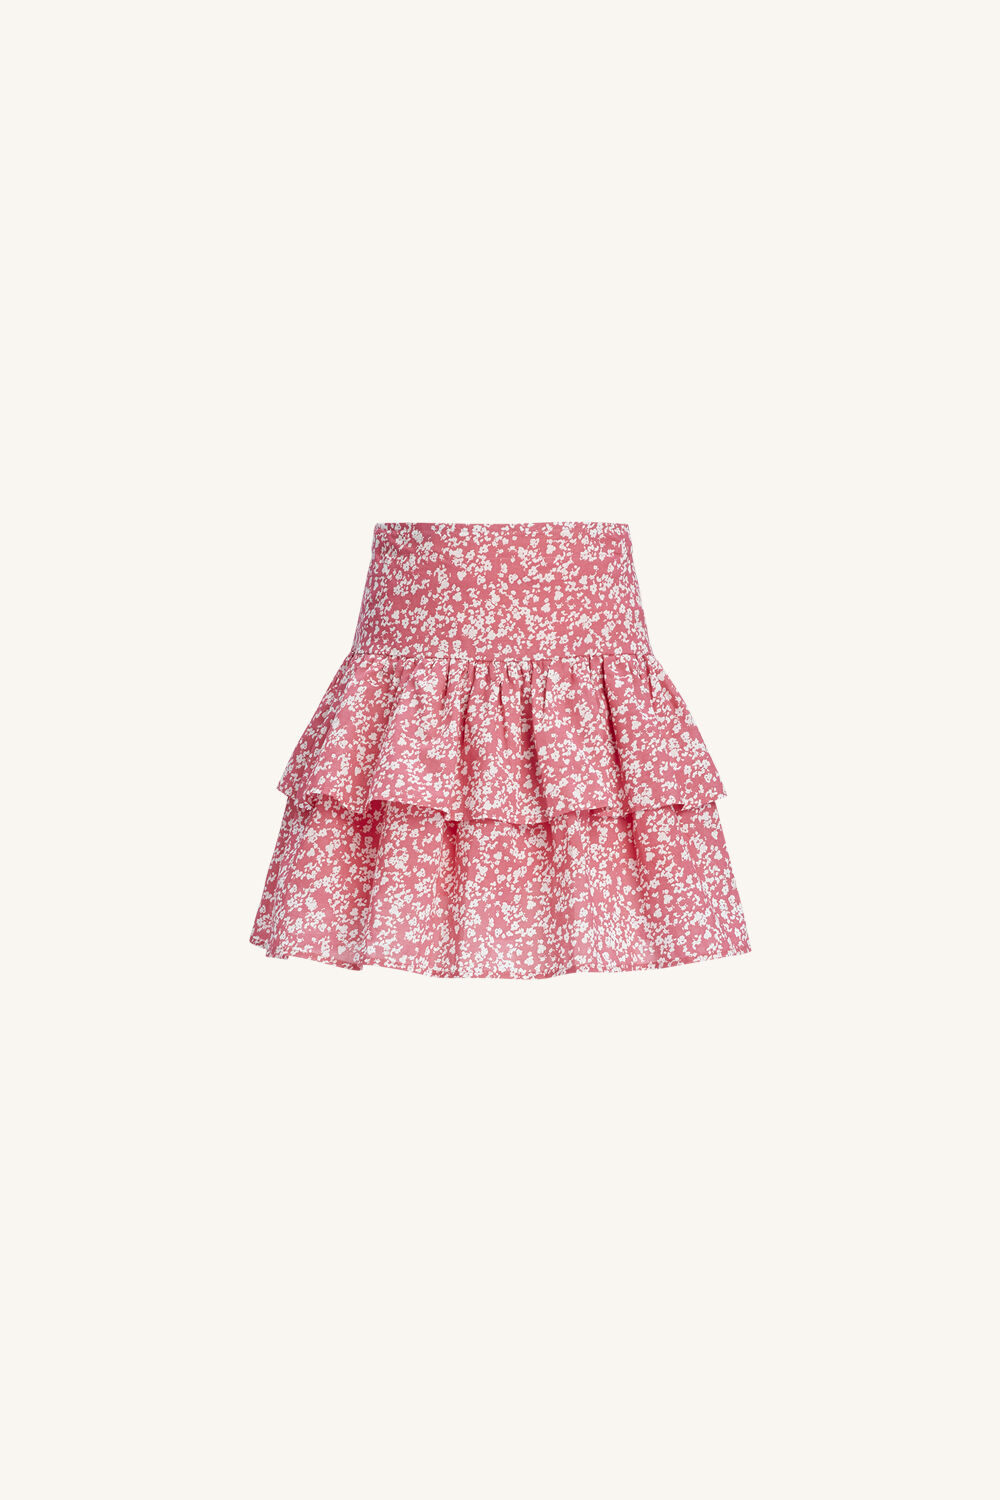 AMEILA FLORAL MINI SKIRT in colour SACHET PINK